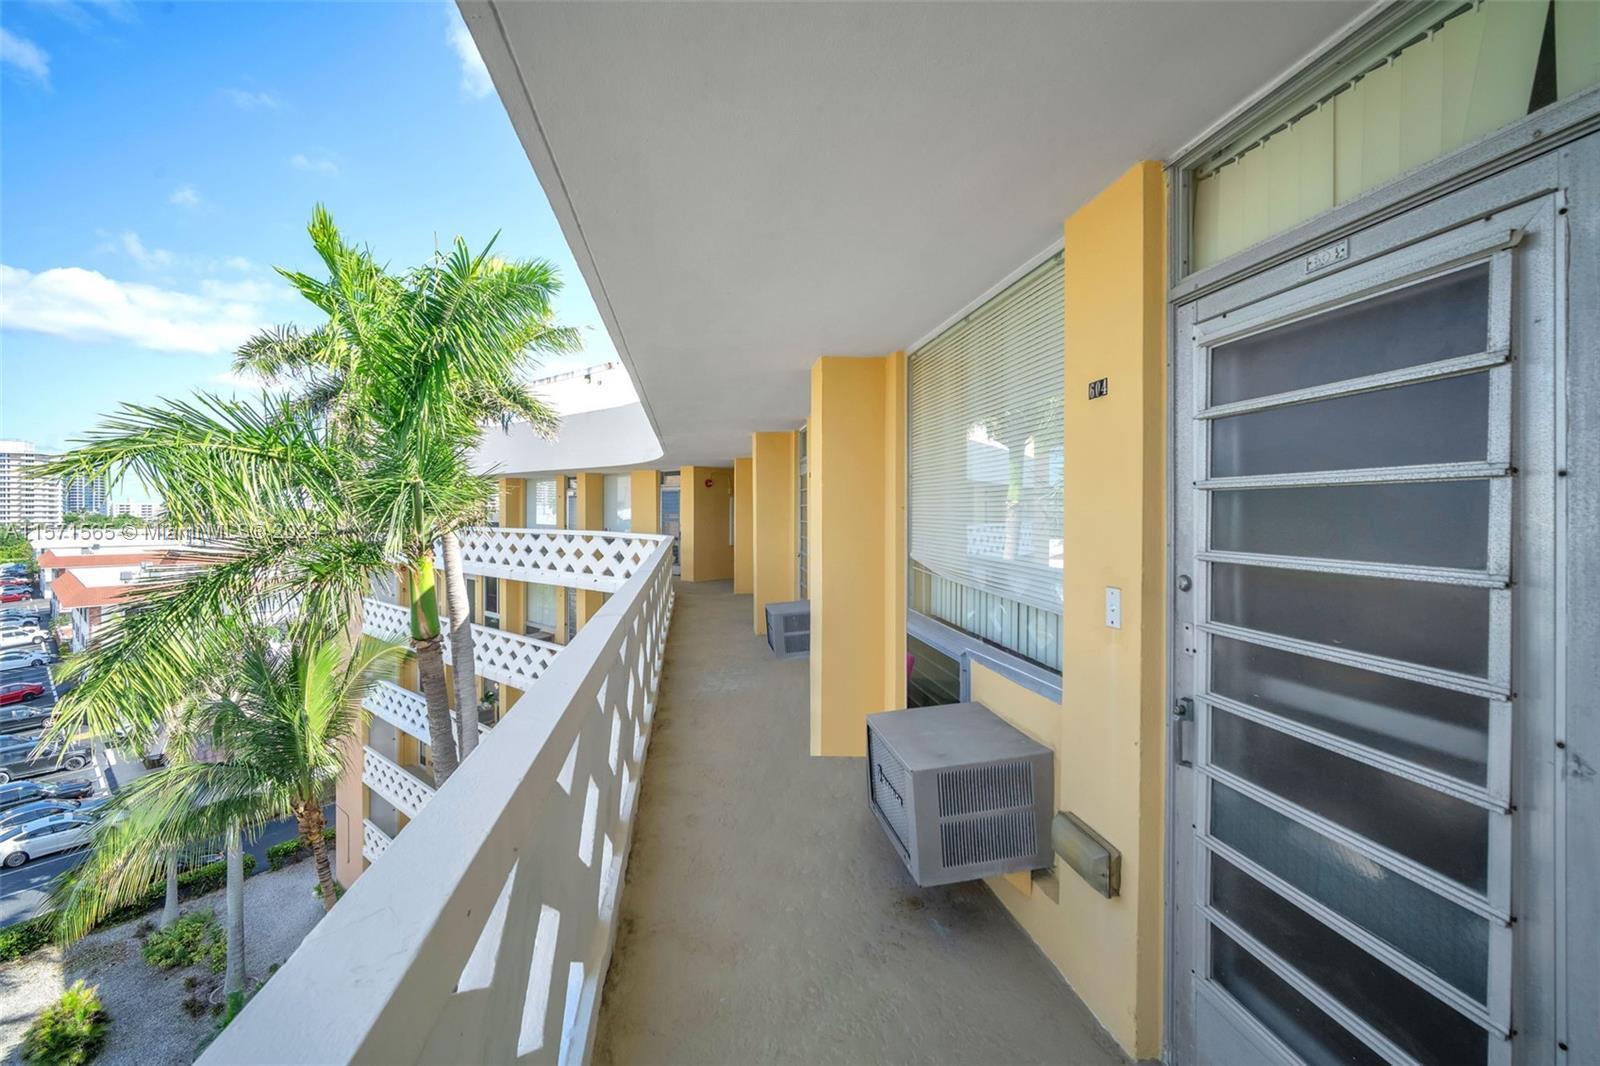 Top floor unit with wide view of the outstanding location in Fort Lauderdale, and it is a few minute